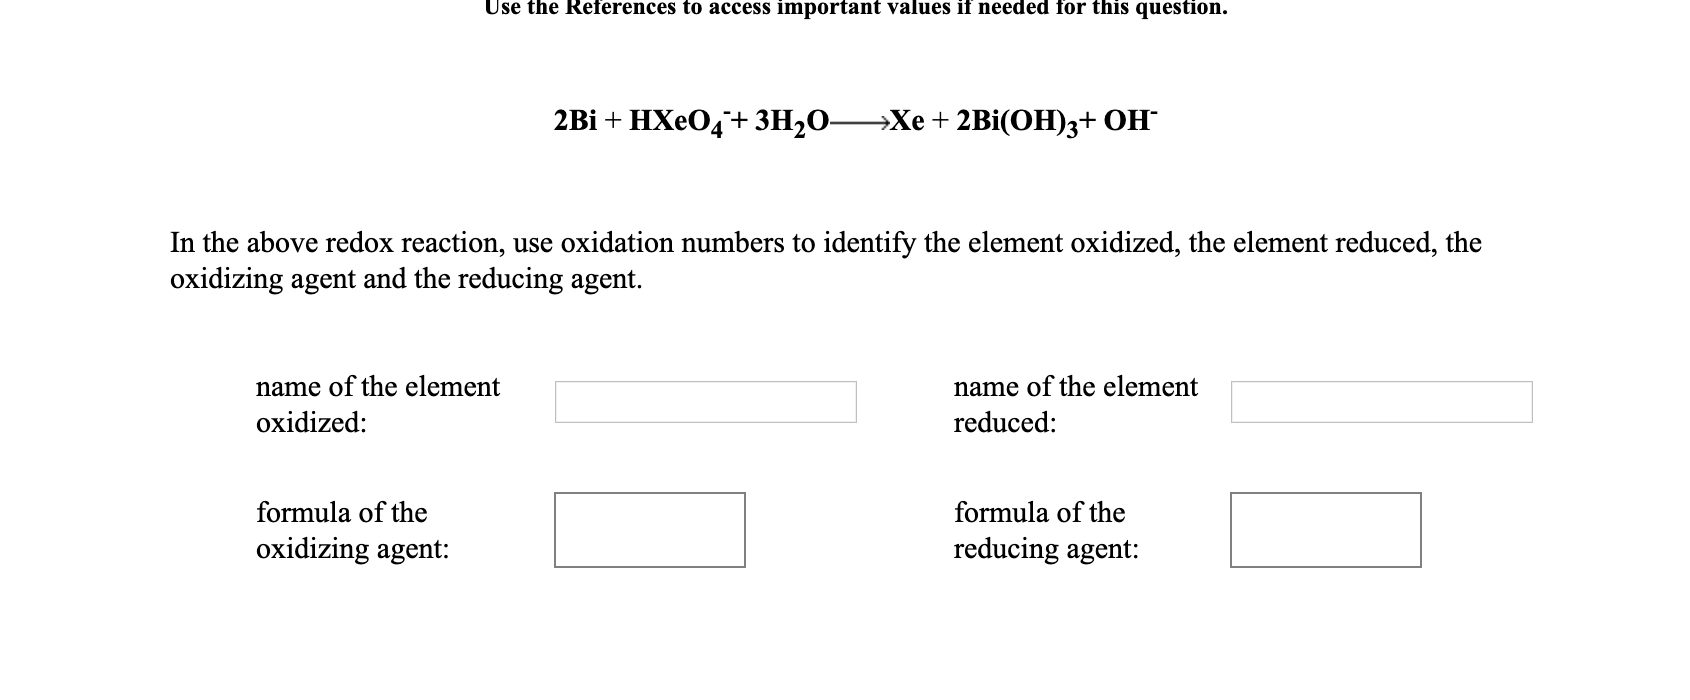 Use the References to access important values if needed for this question.
2Bi + HXeO4+ 3H2O-
—Хе + 2Bi(ОН)з+ ОН
In the above redox reaction, use oxidation numbers to identify the element oxidized, the element reduced, the
oxidizing agent and the reducing agent.
name of the element
name of the element
oxidized:
reduced:
formula of the
formula of the
oxidizing agent:
reducing agent:
